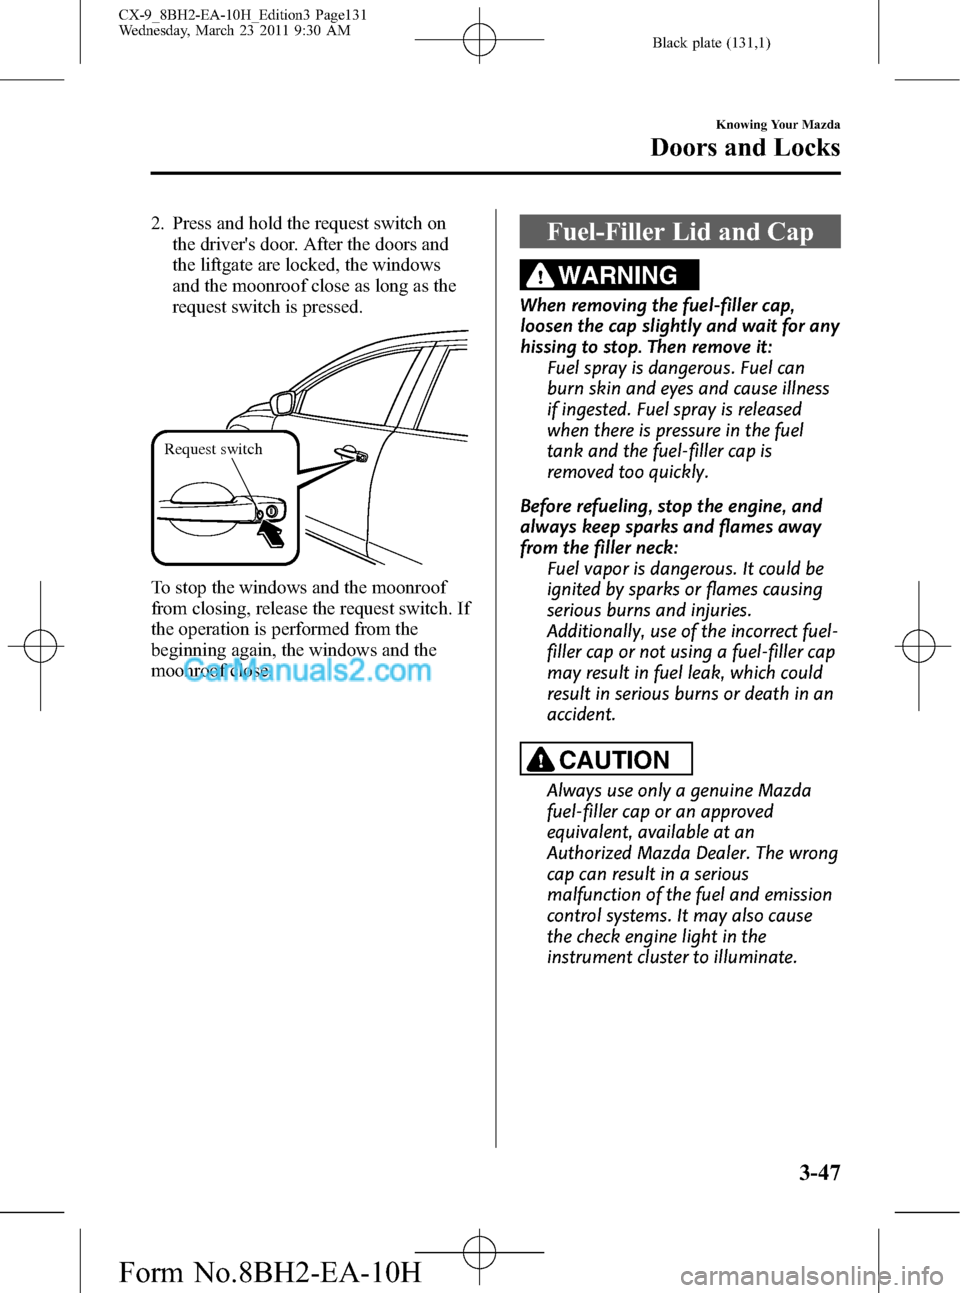 MAZDA MODEL CX-9 2011  Owners Manual (in English) Black plate (131,1)
2. Press and hold the request switch on
the drivers door. After the doors and
the liftgate are locked, the windows
and the moonroof close as long as the
request switch is pressed.